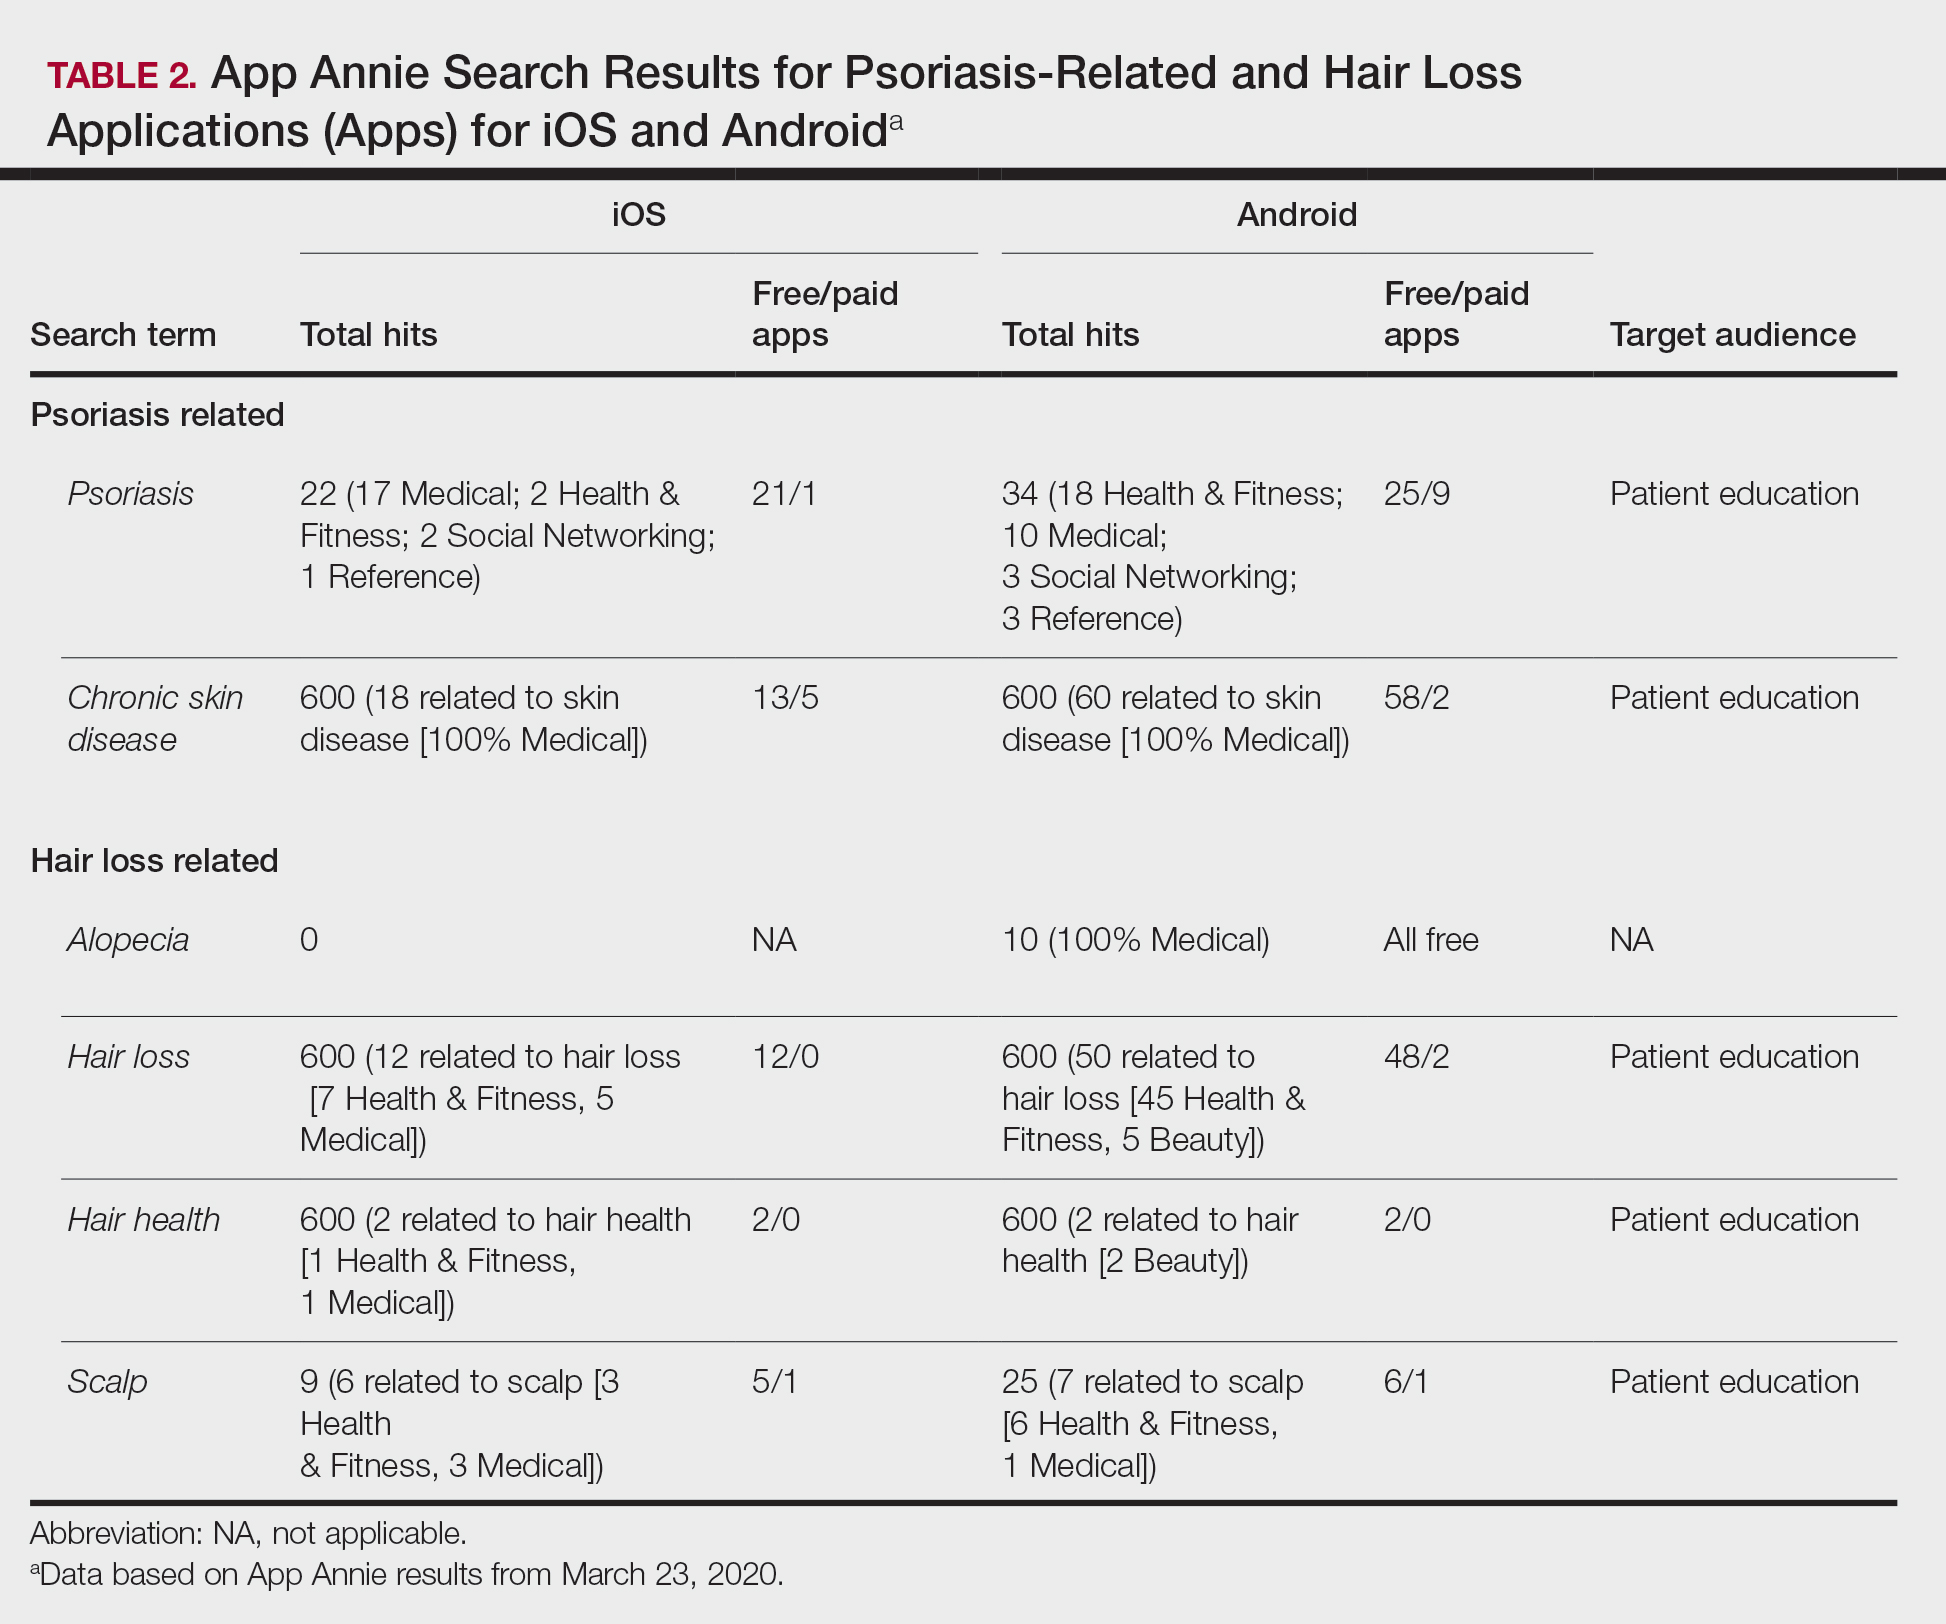 App Annie Search Results for Psoriasis-Related and Hair Loss Applications (Apps) for iOS and Android